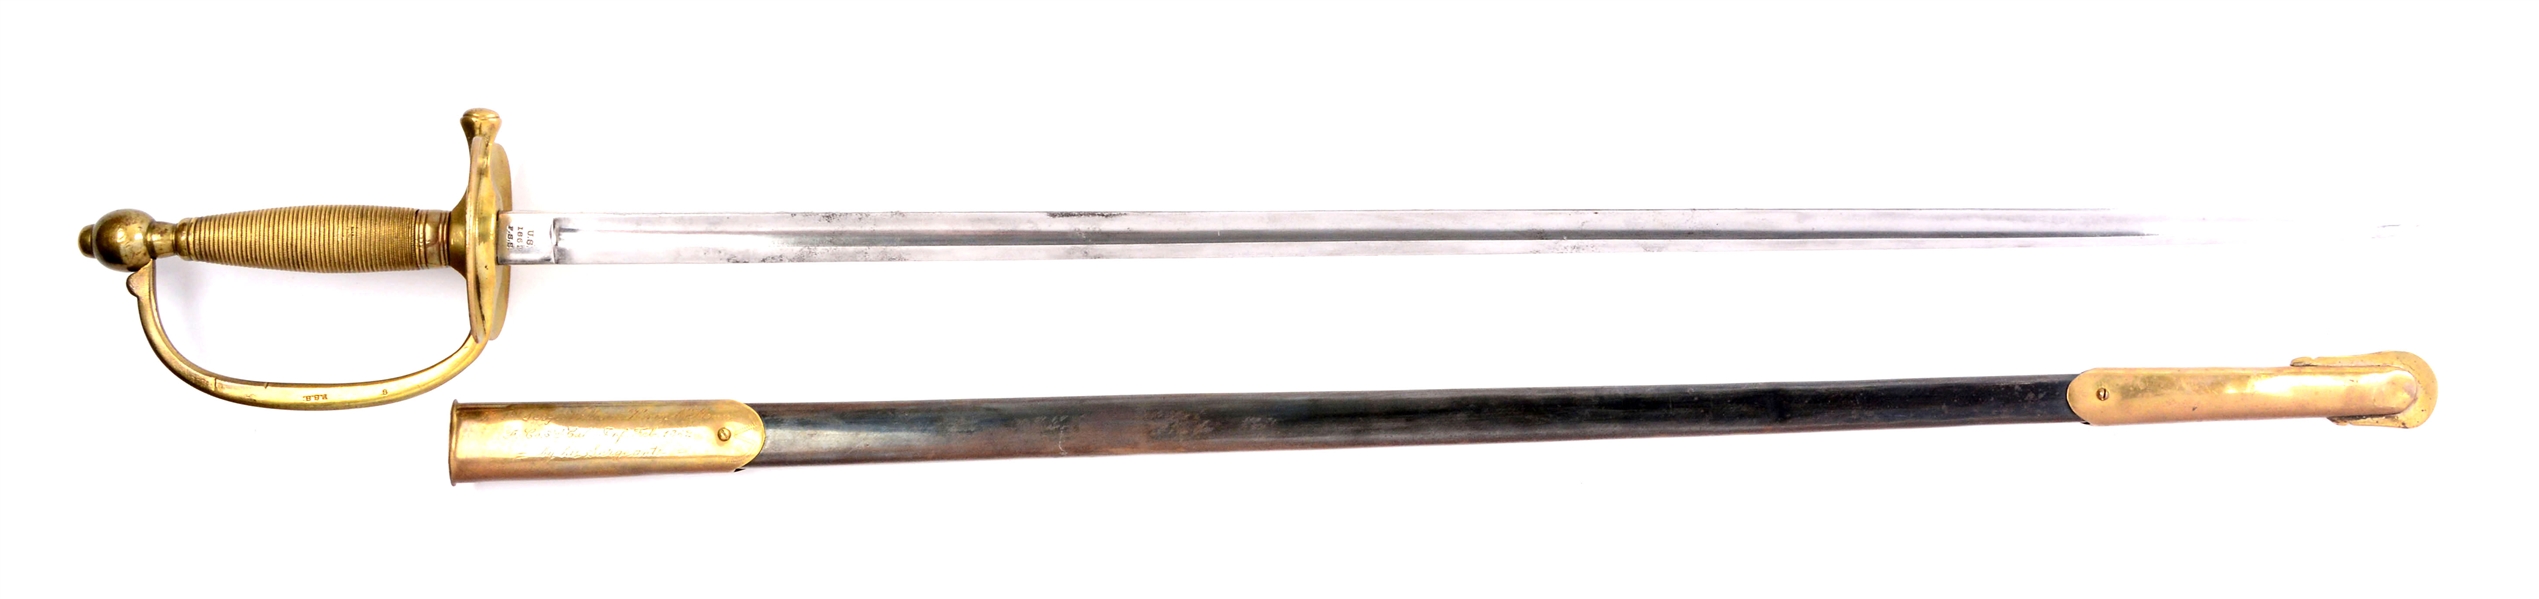 U.S. MODEL 1840 NCO CALIFORNIA PRESENTATION SWORD BY ROBY TO SERGEANT WILLIAM HENRY MCMINN IN 1862.